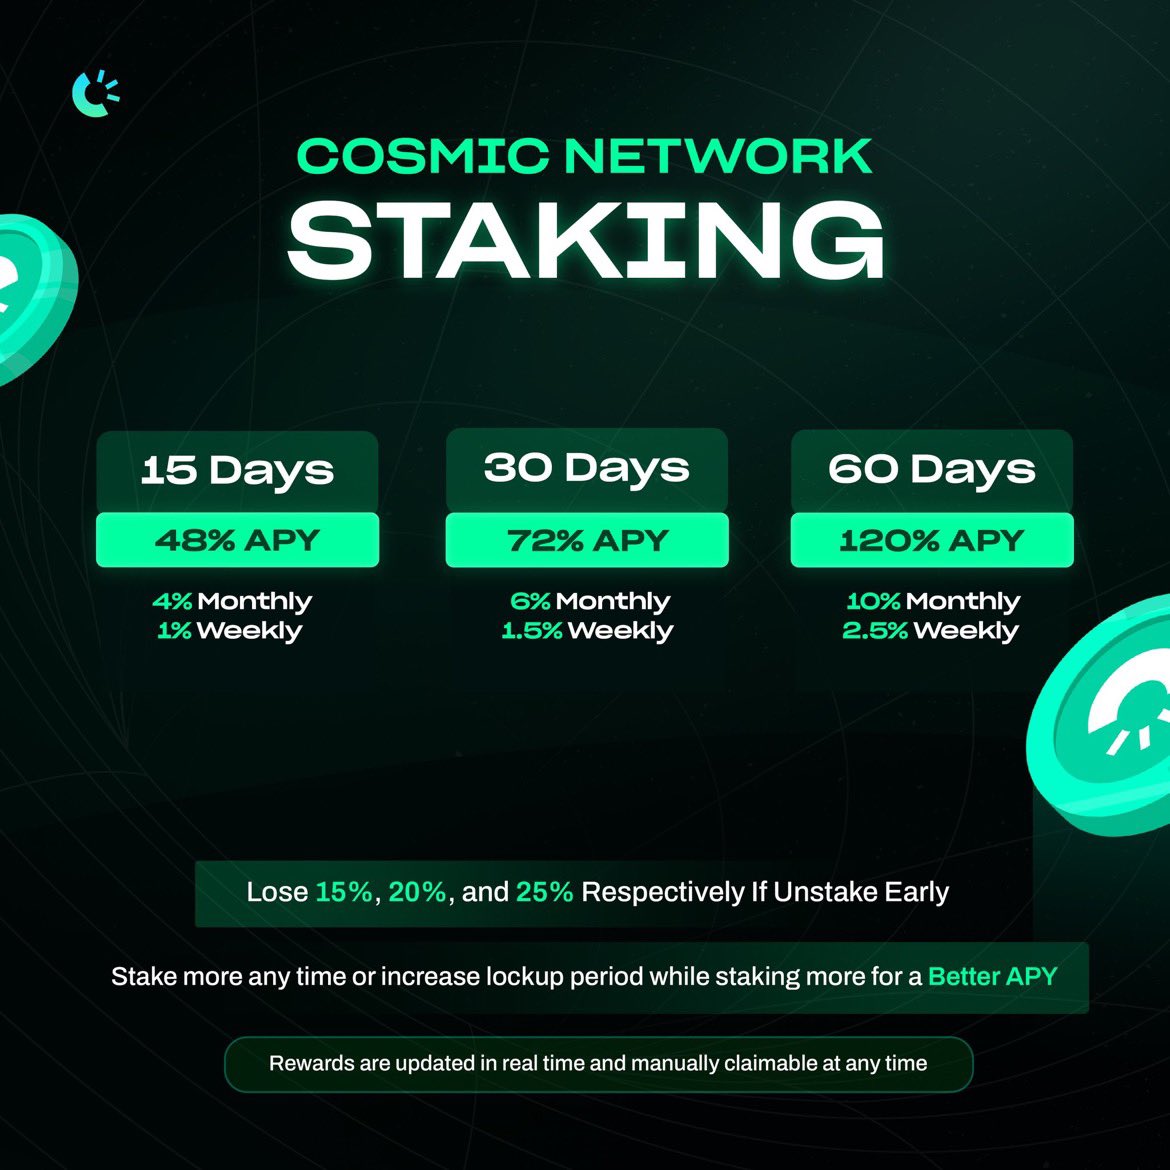 Whaaaat 👀 $COSMIC keeps delivering. Unbelievable their power & transparency to their community. I really do see $COSMIC will be a sendor this cycle! @Network_Cosmic_